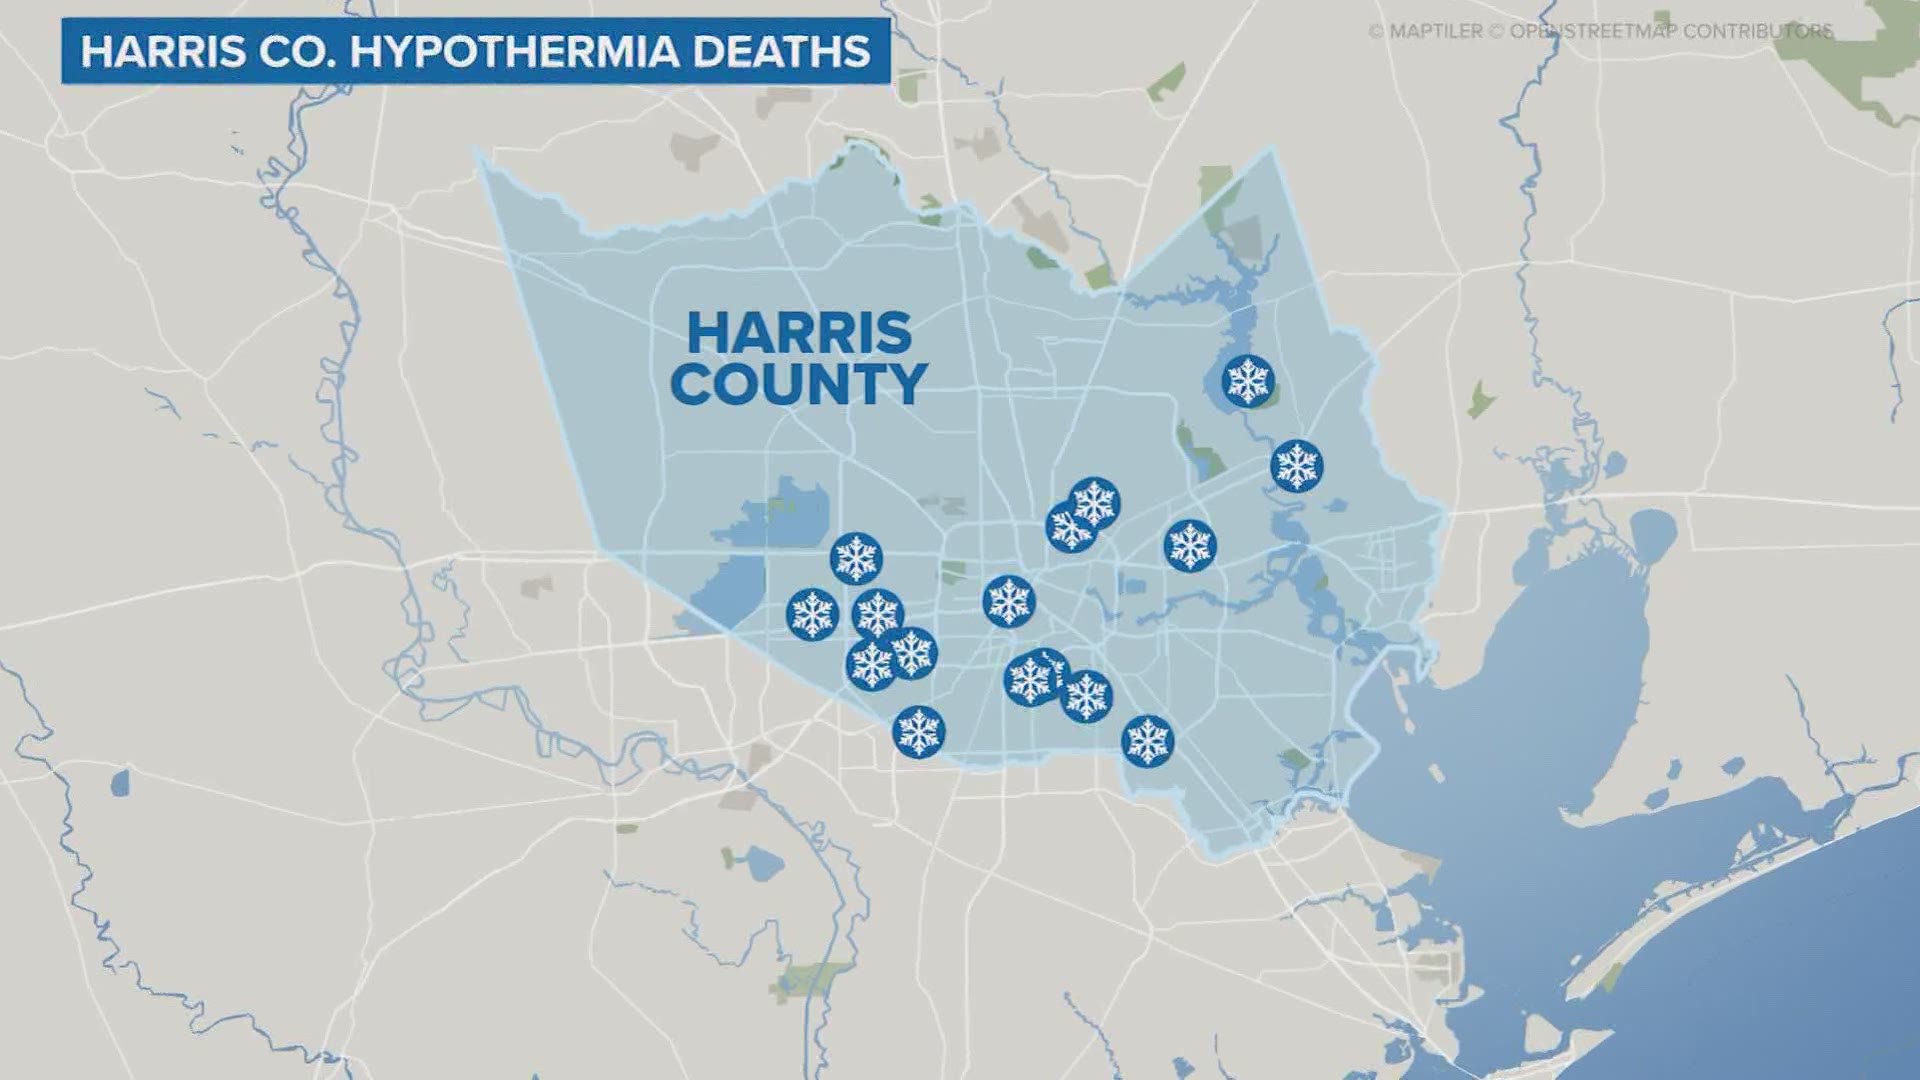 Medical examiners have so far determined 16 people in Harris County died from hypothermia last week.